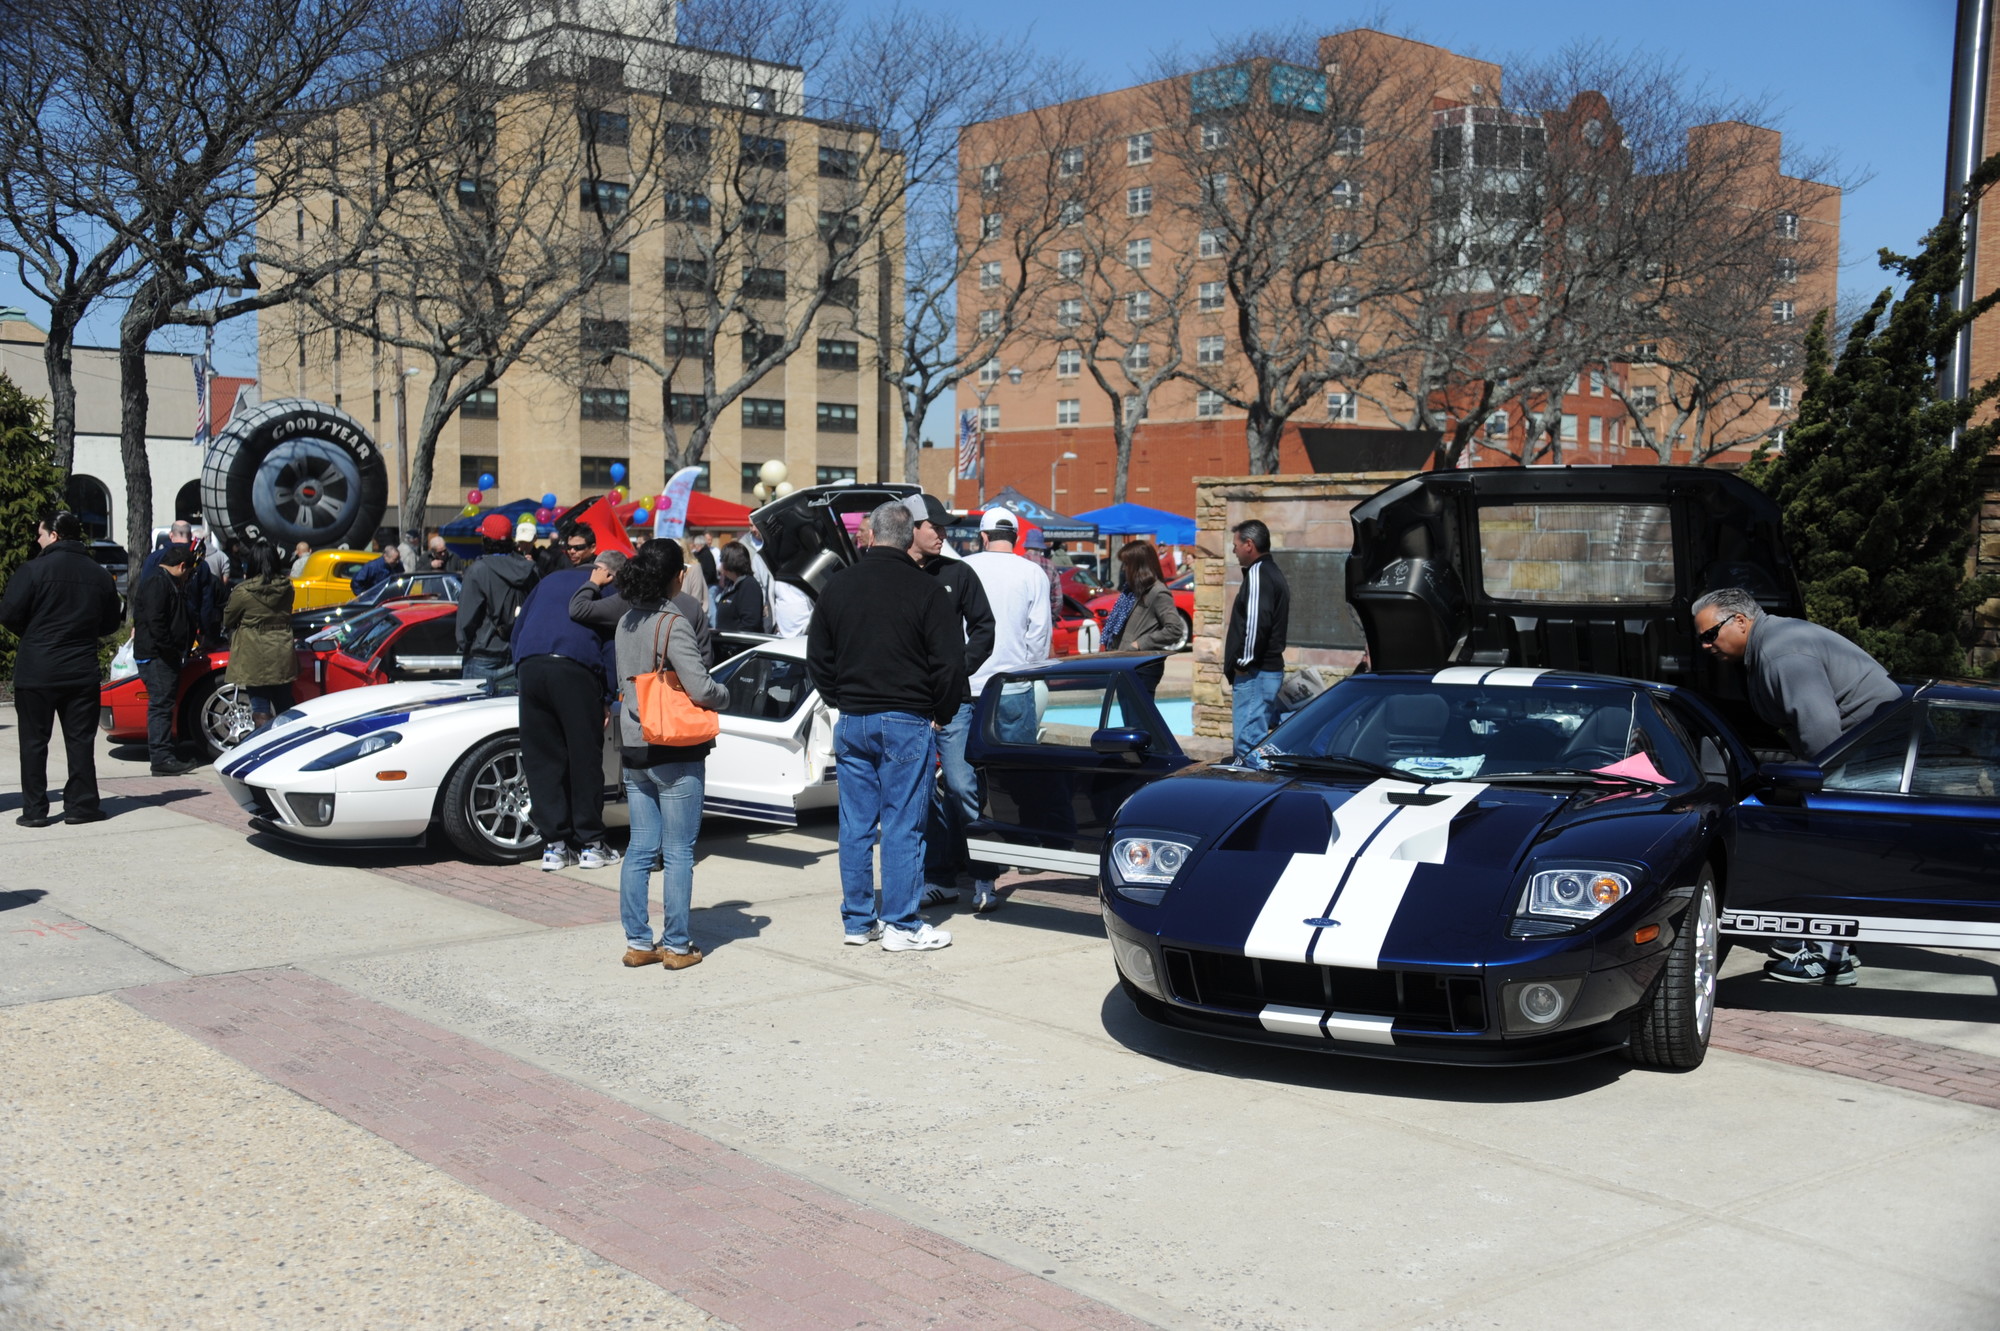 Chamber President Mark Tannenbaum said patrons came from as far away as Westchester and Bergen counties to admire the cars vehicles and enjoy the good weather.